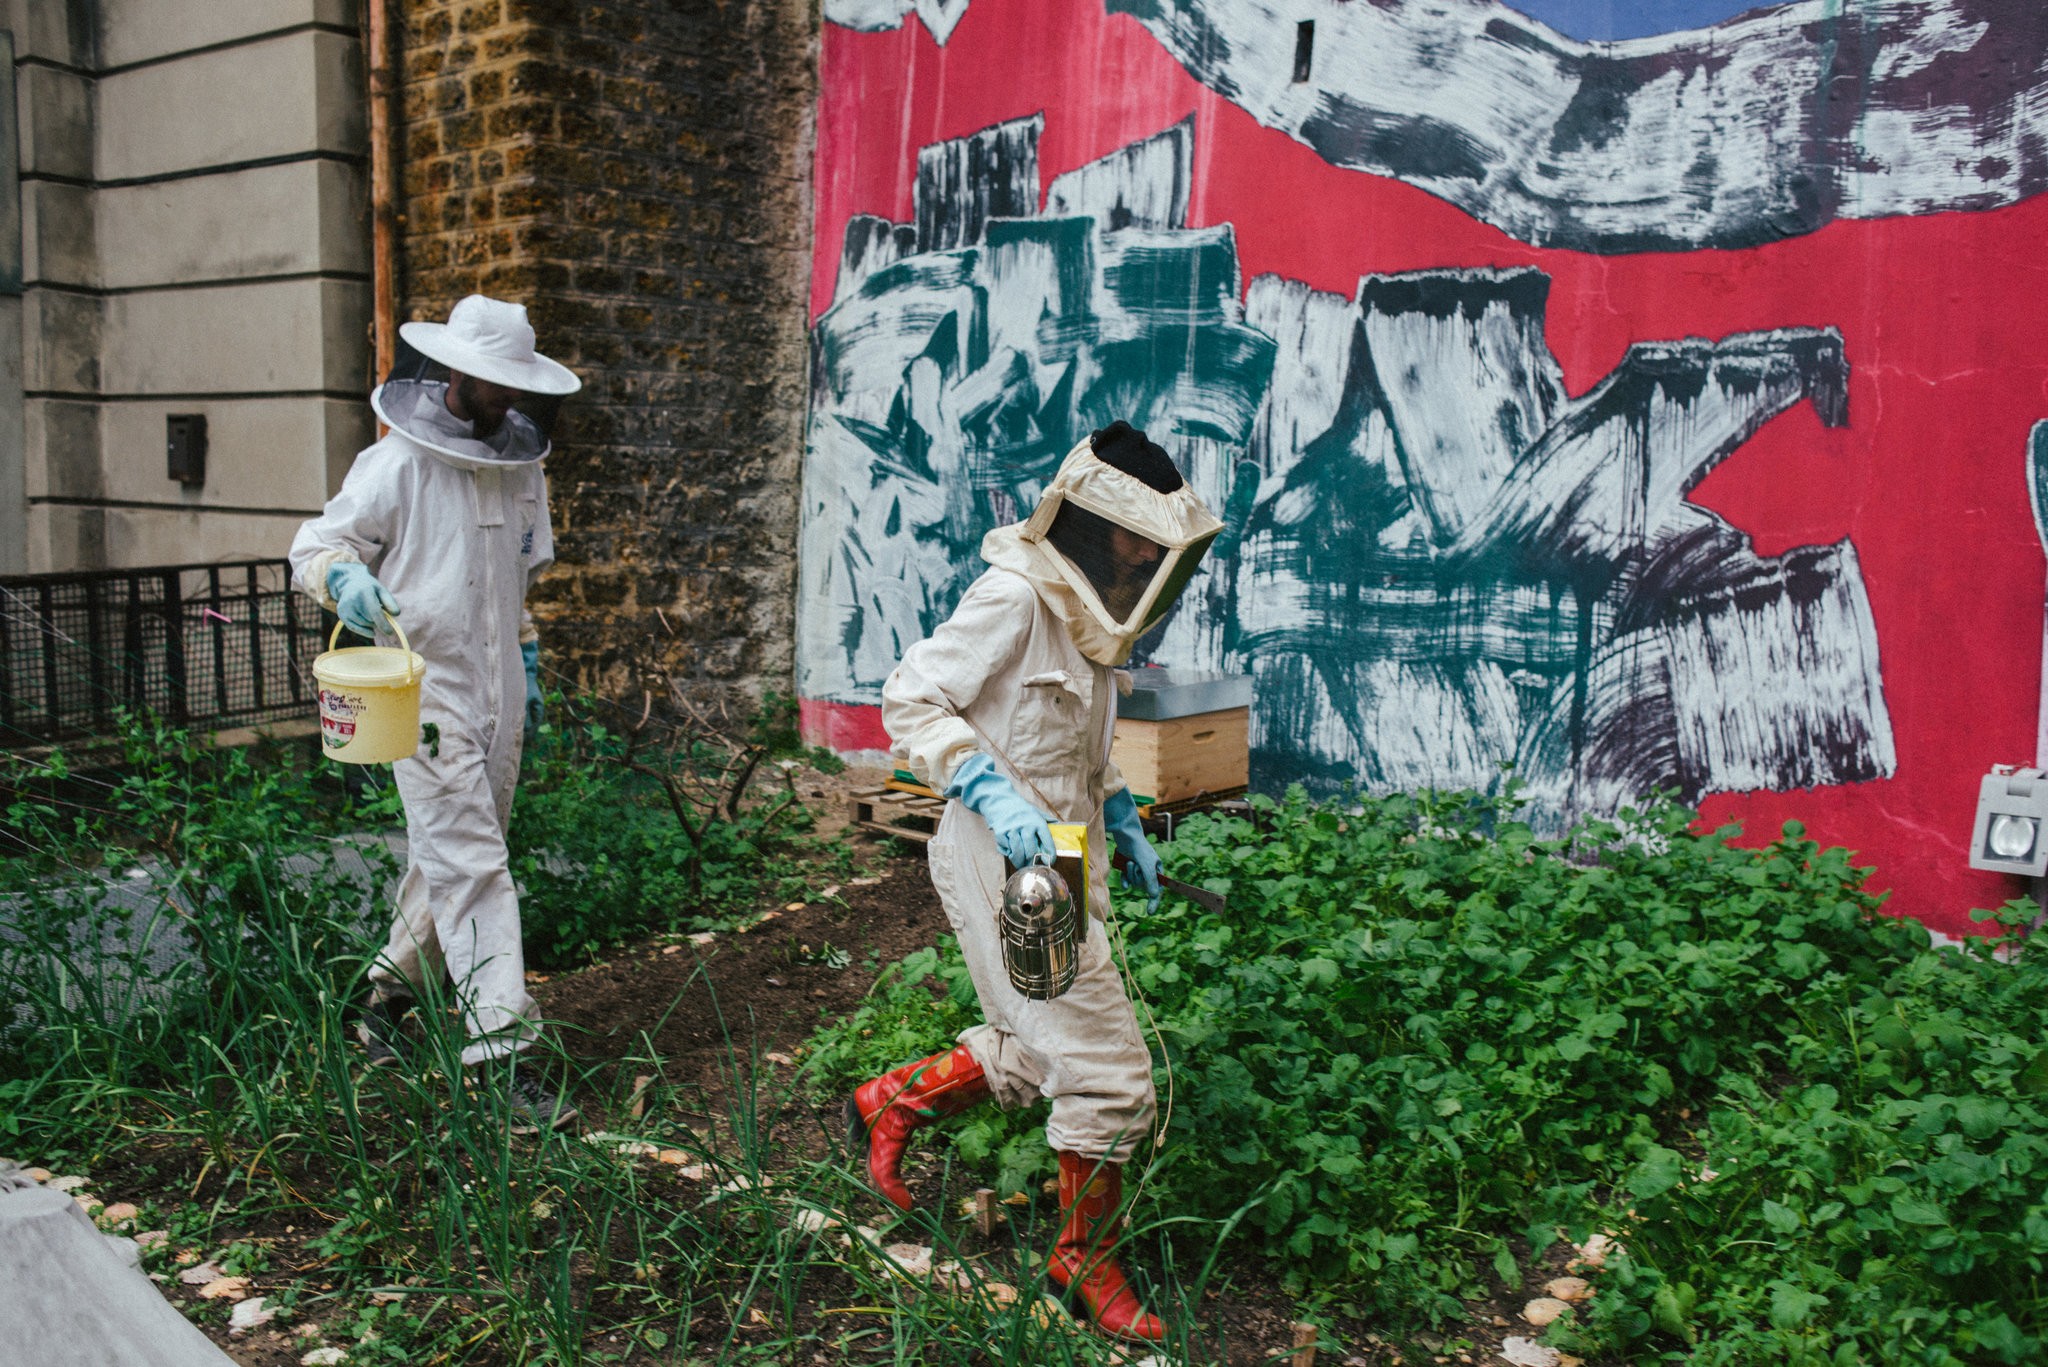  Jason Beliveau, left, sous chef at Les Grands Verres restaurant at the Palais de Tokyo museum and Ms. Lozoff, a beekeeper, working at the museum’s vegetable garden.   